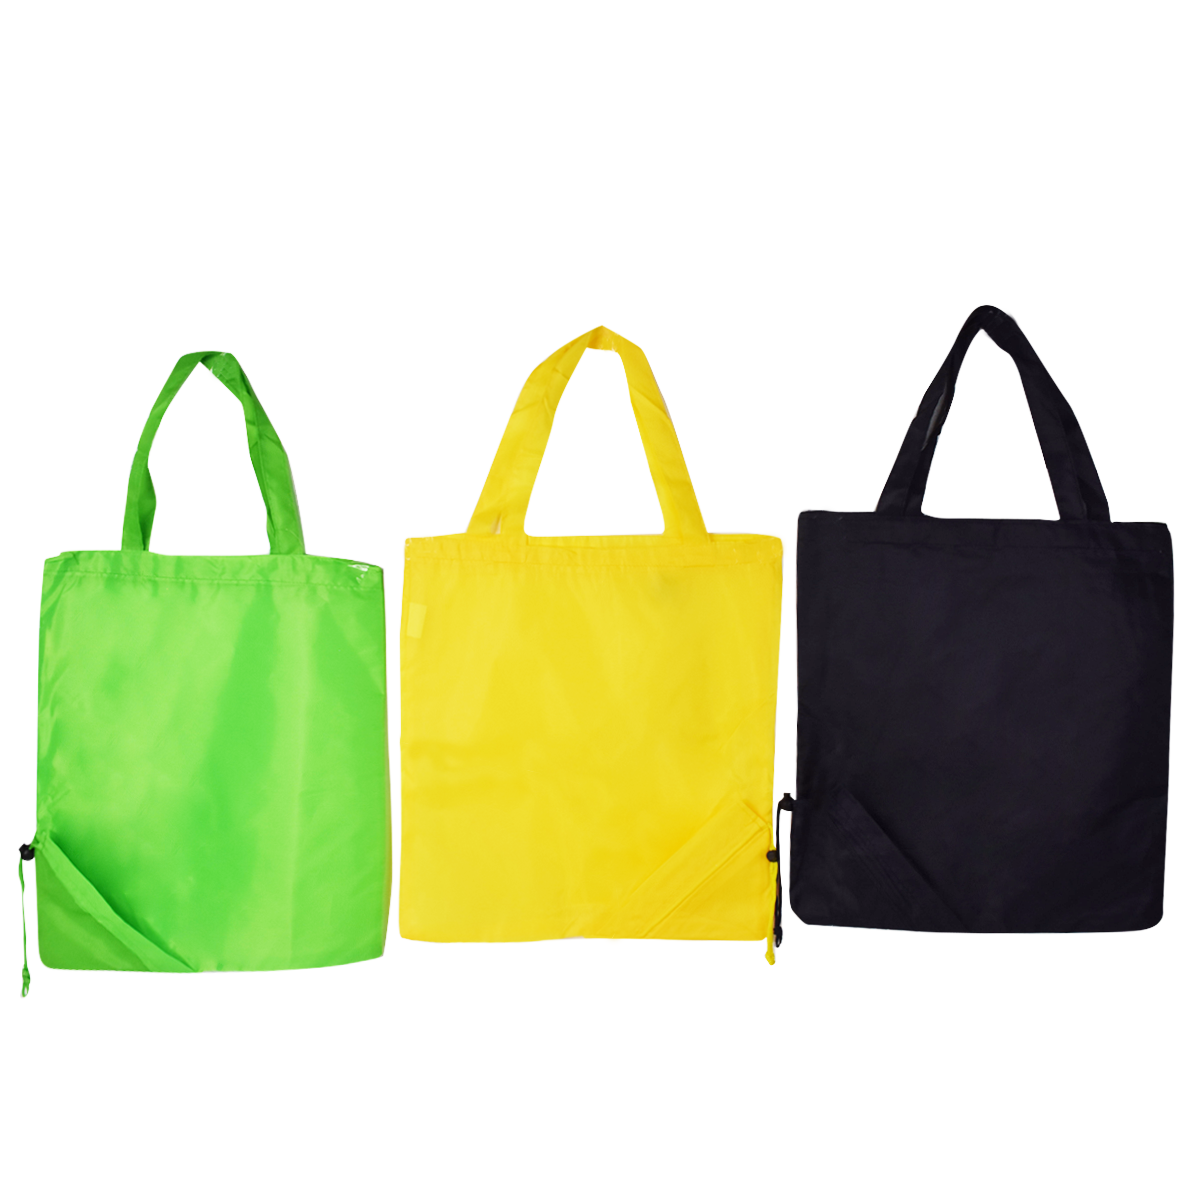 Market Tote | Leather Bags for Women | Urban Southern